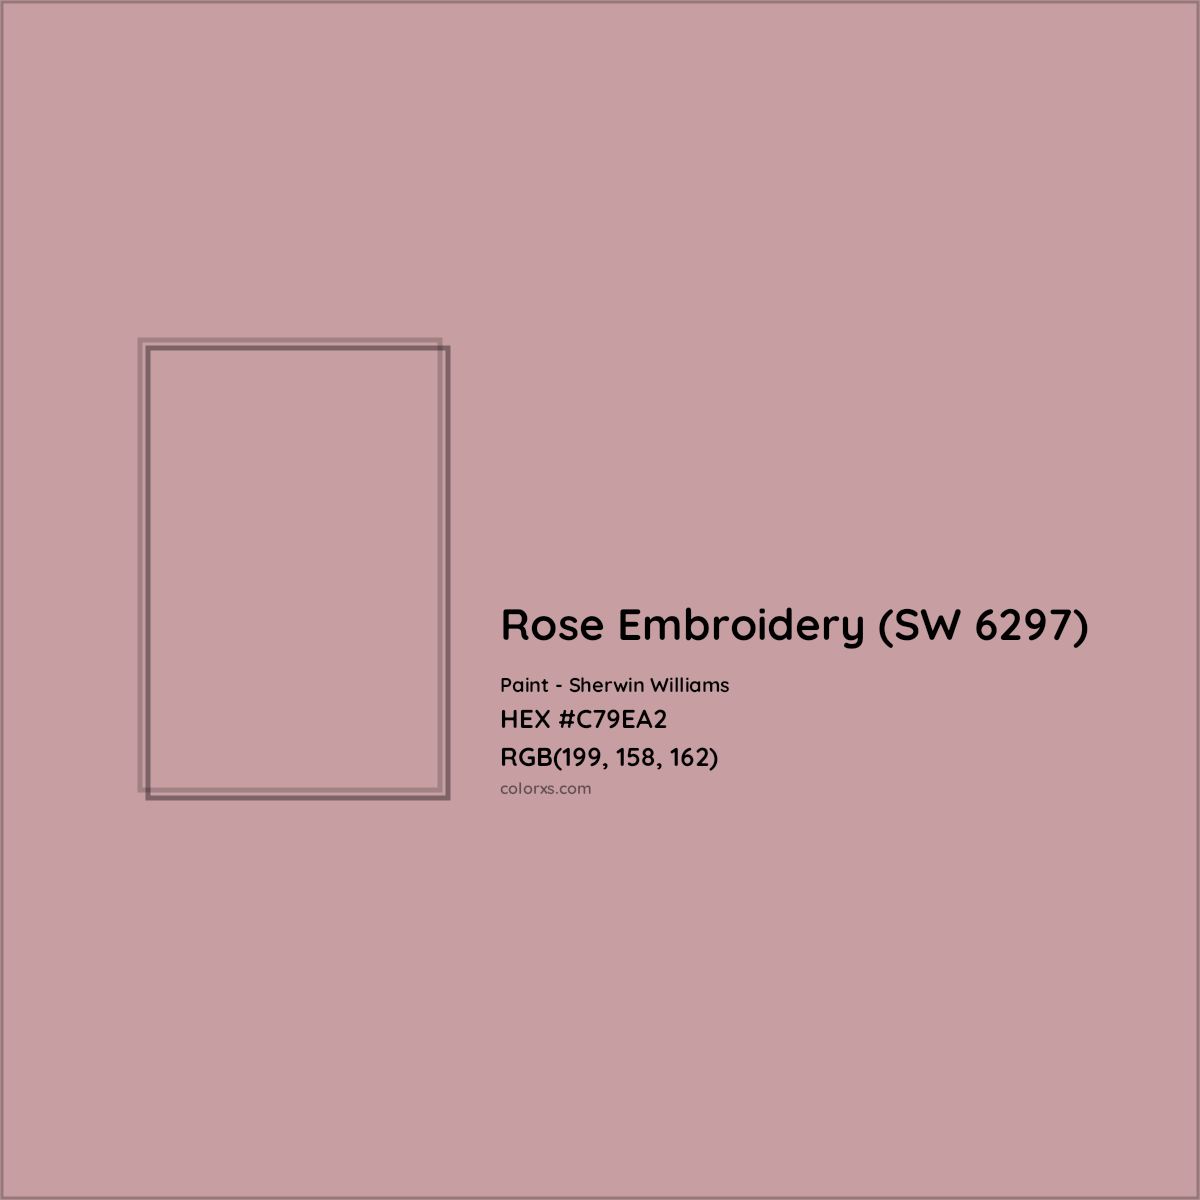 HEX #C79EA2 Rose Embroidery (SW 6297) Paint Sherwin Williams - Color Code